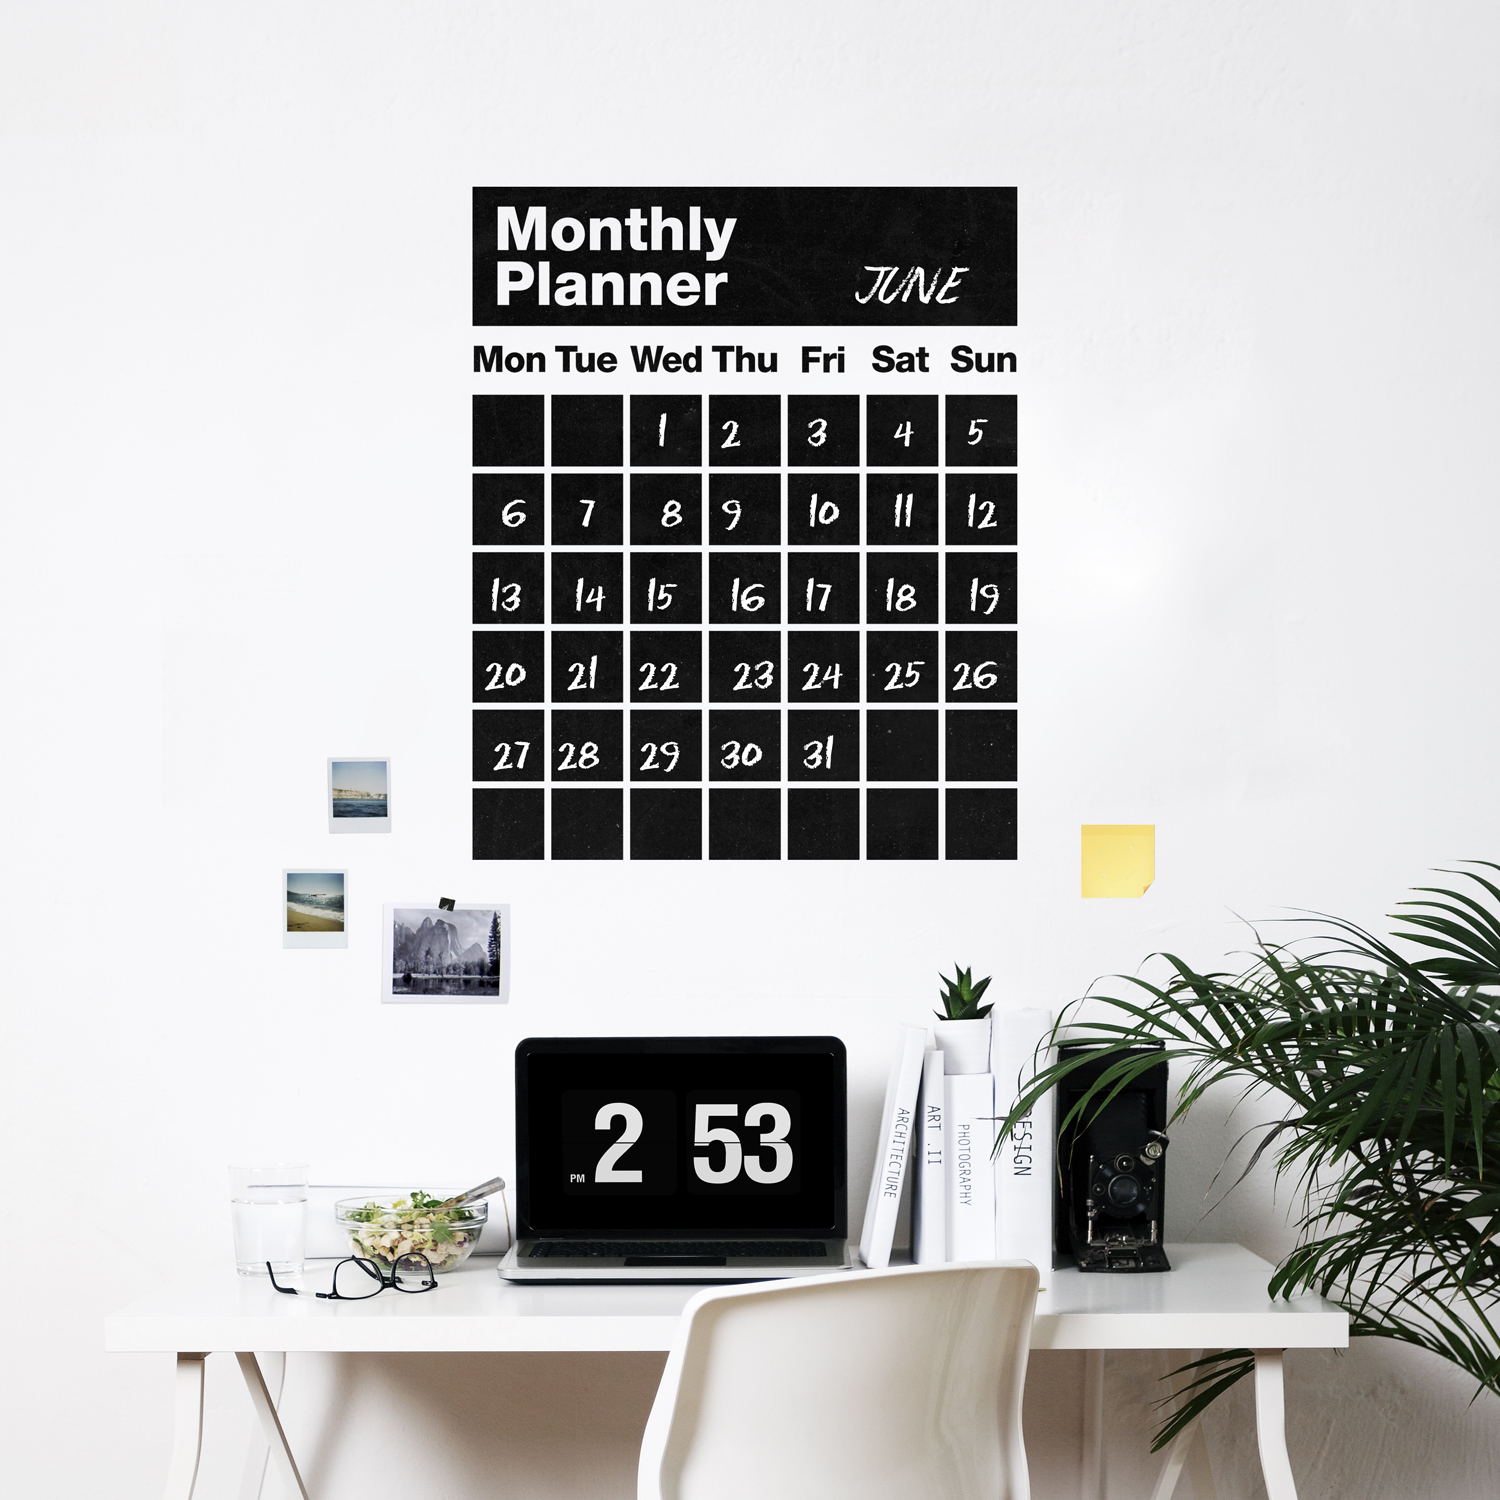 Lavagna adesiva - Monthly Planner